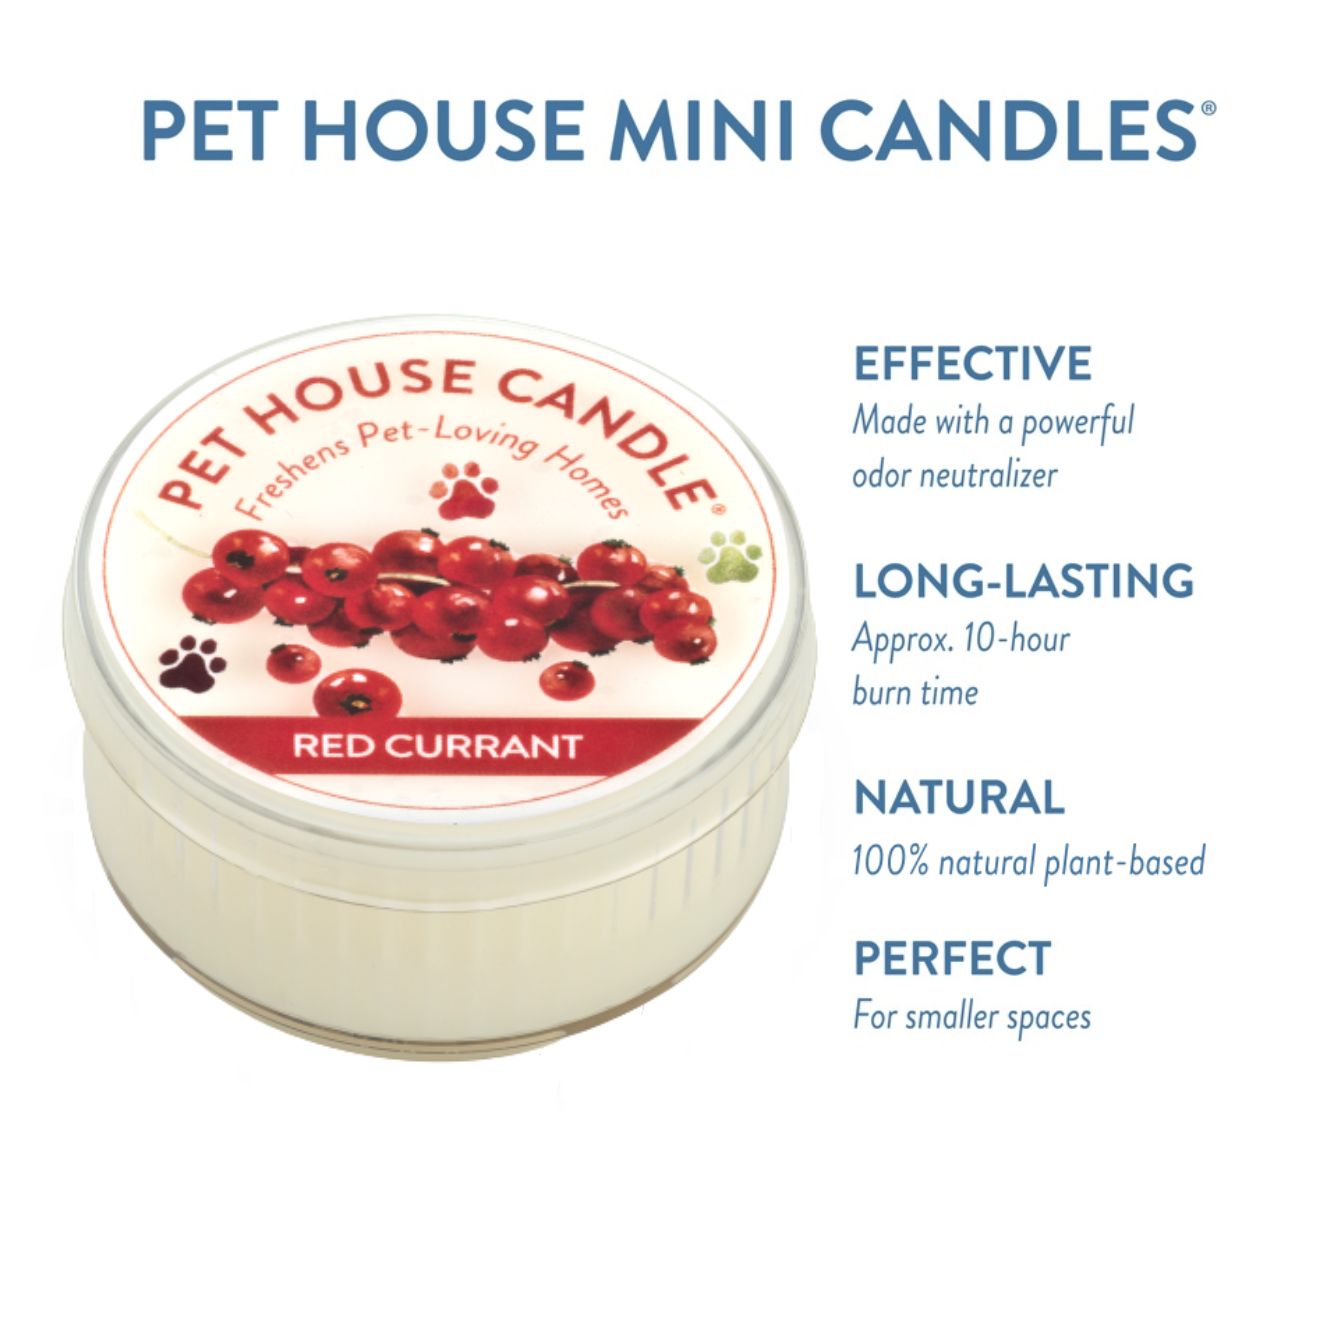 Red Currant Mini Candle infographics